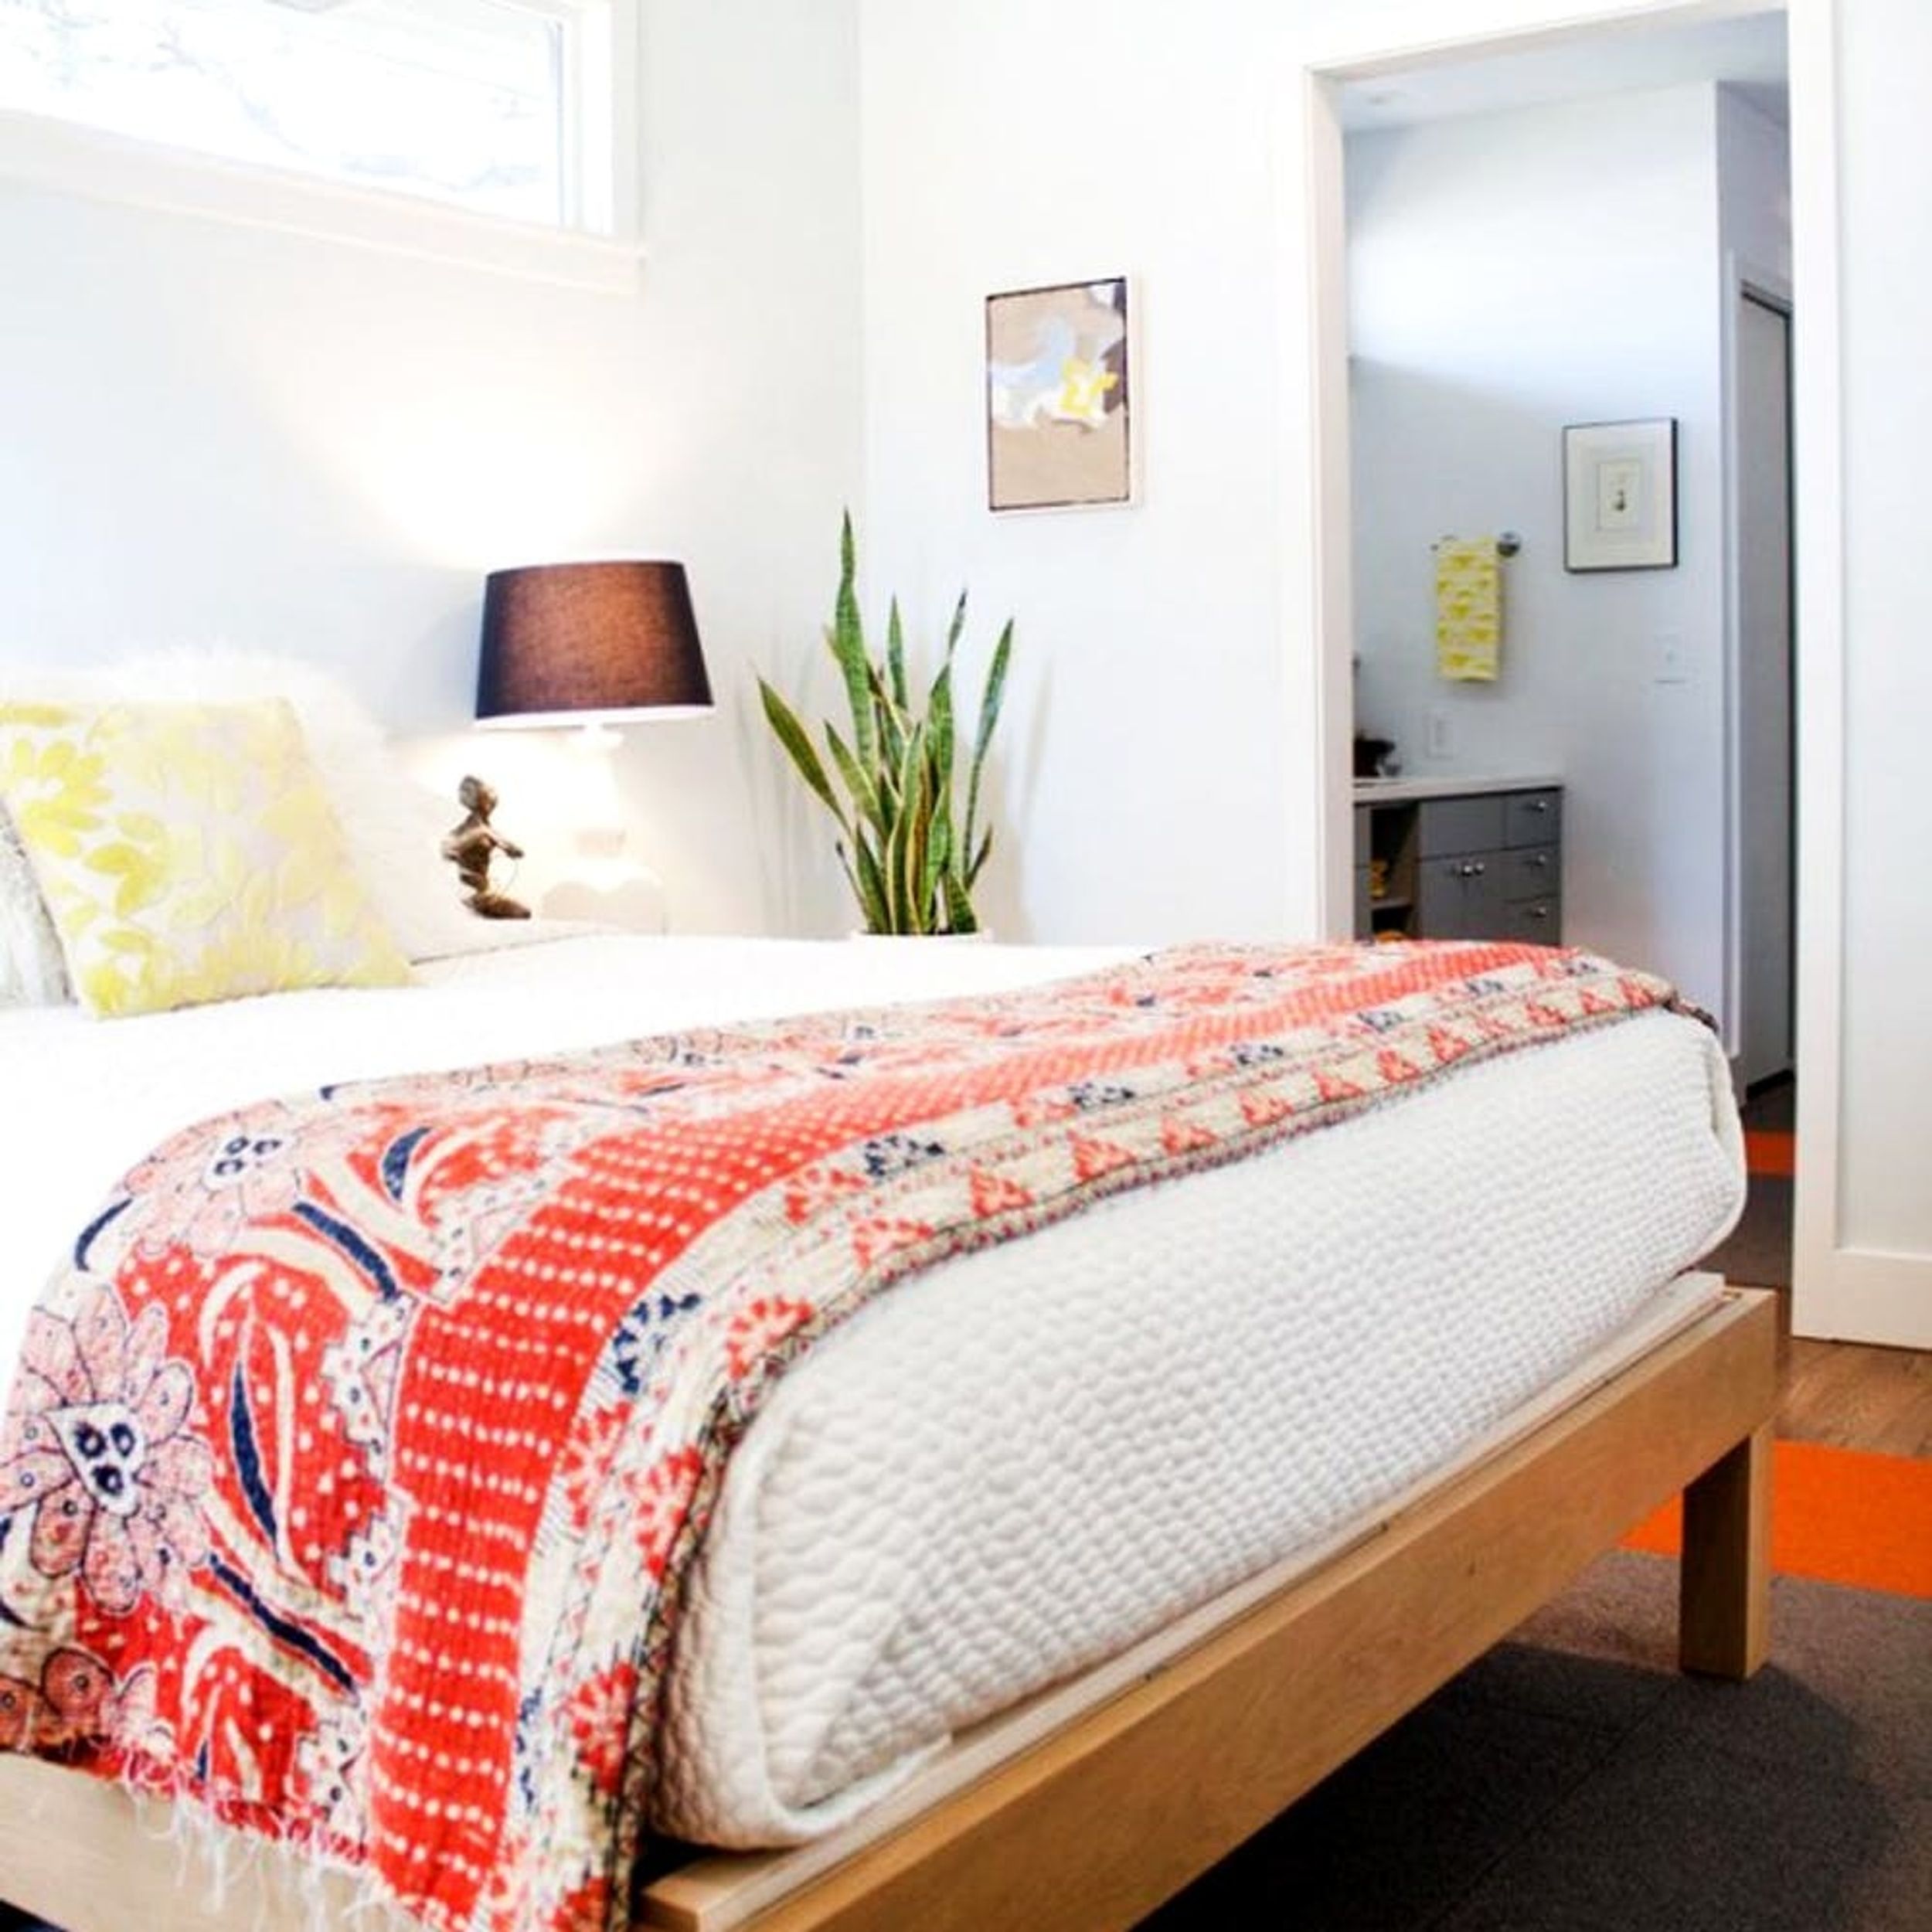 10 Last-Minute Tips for Prepping Your Guest Room